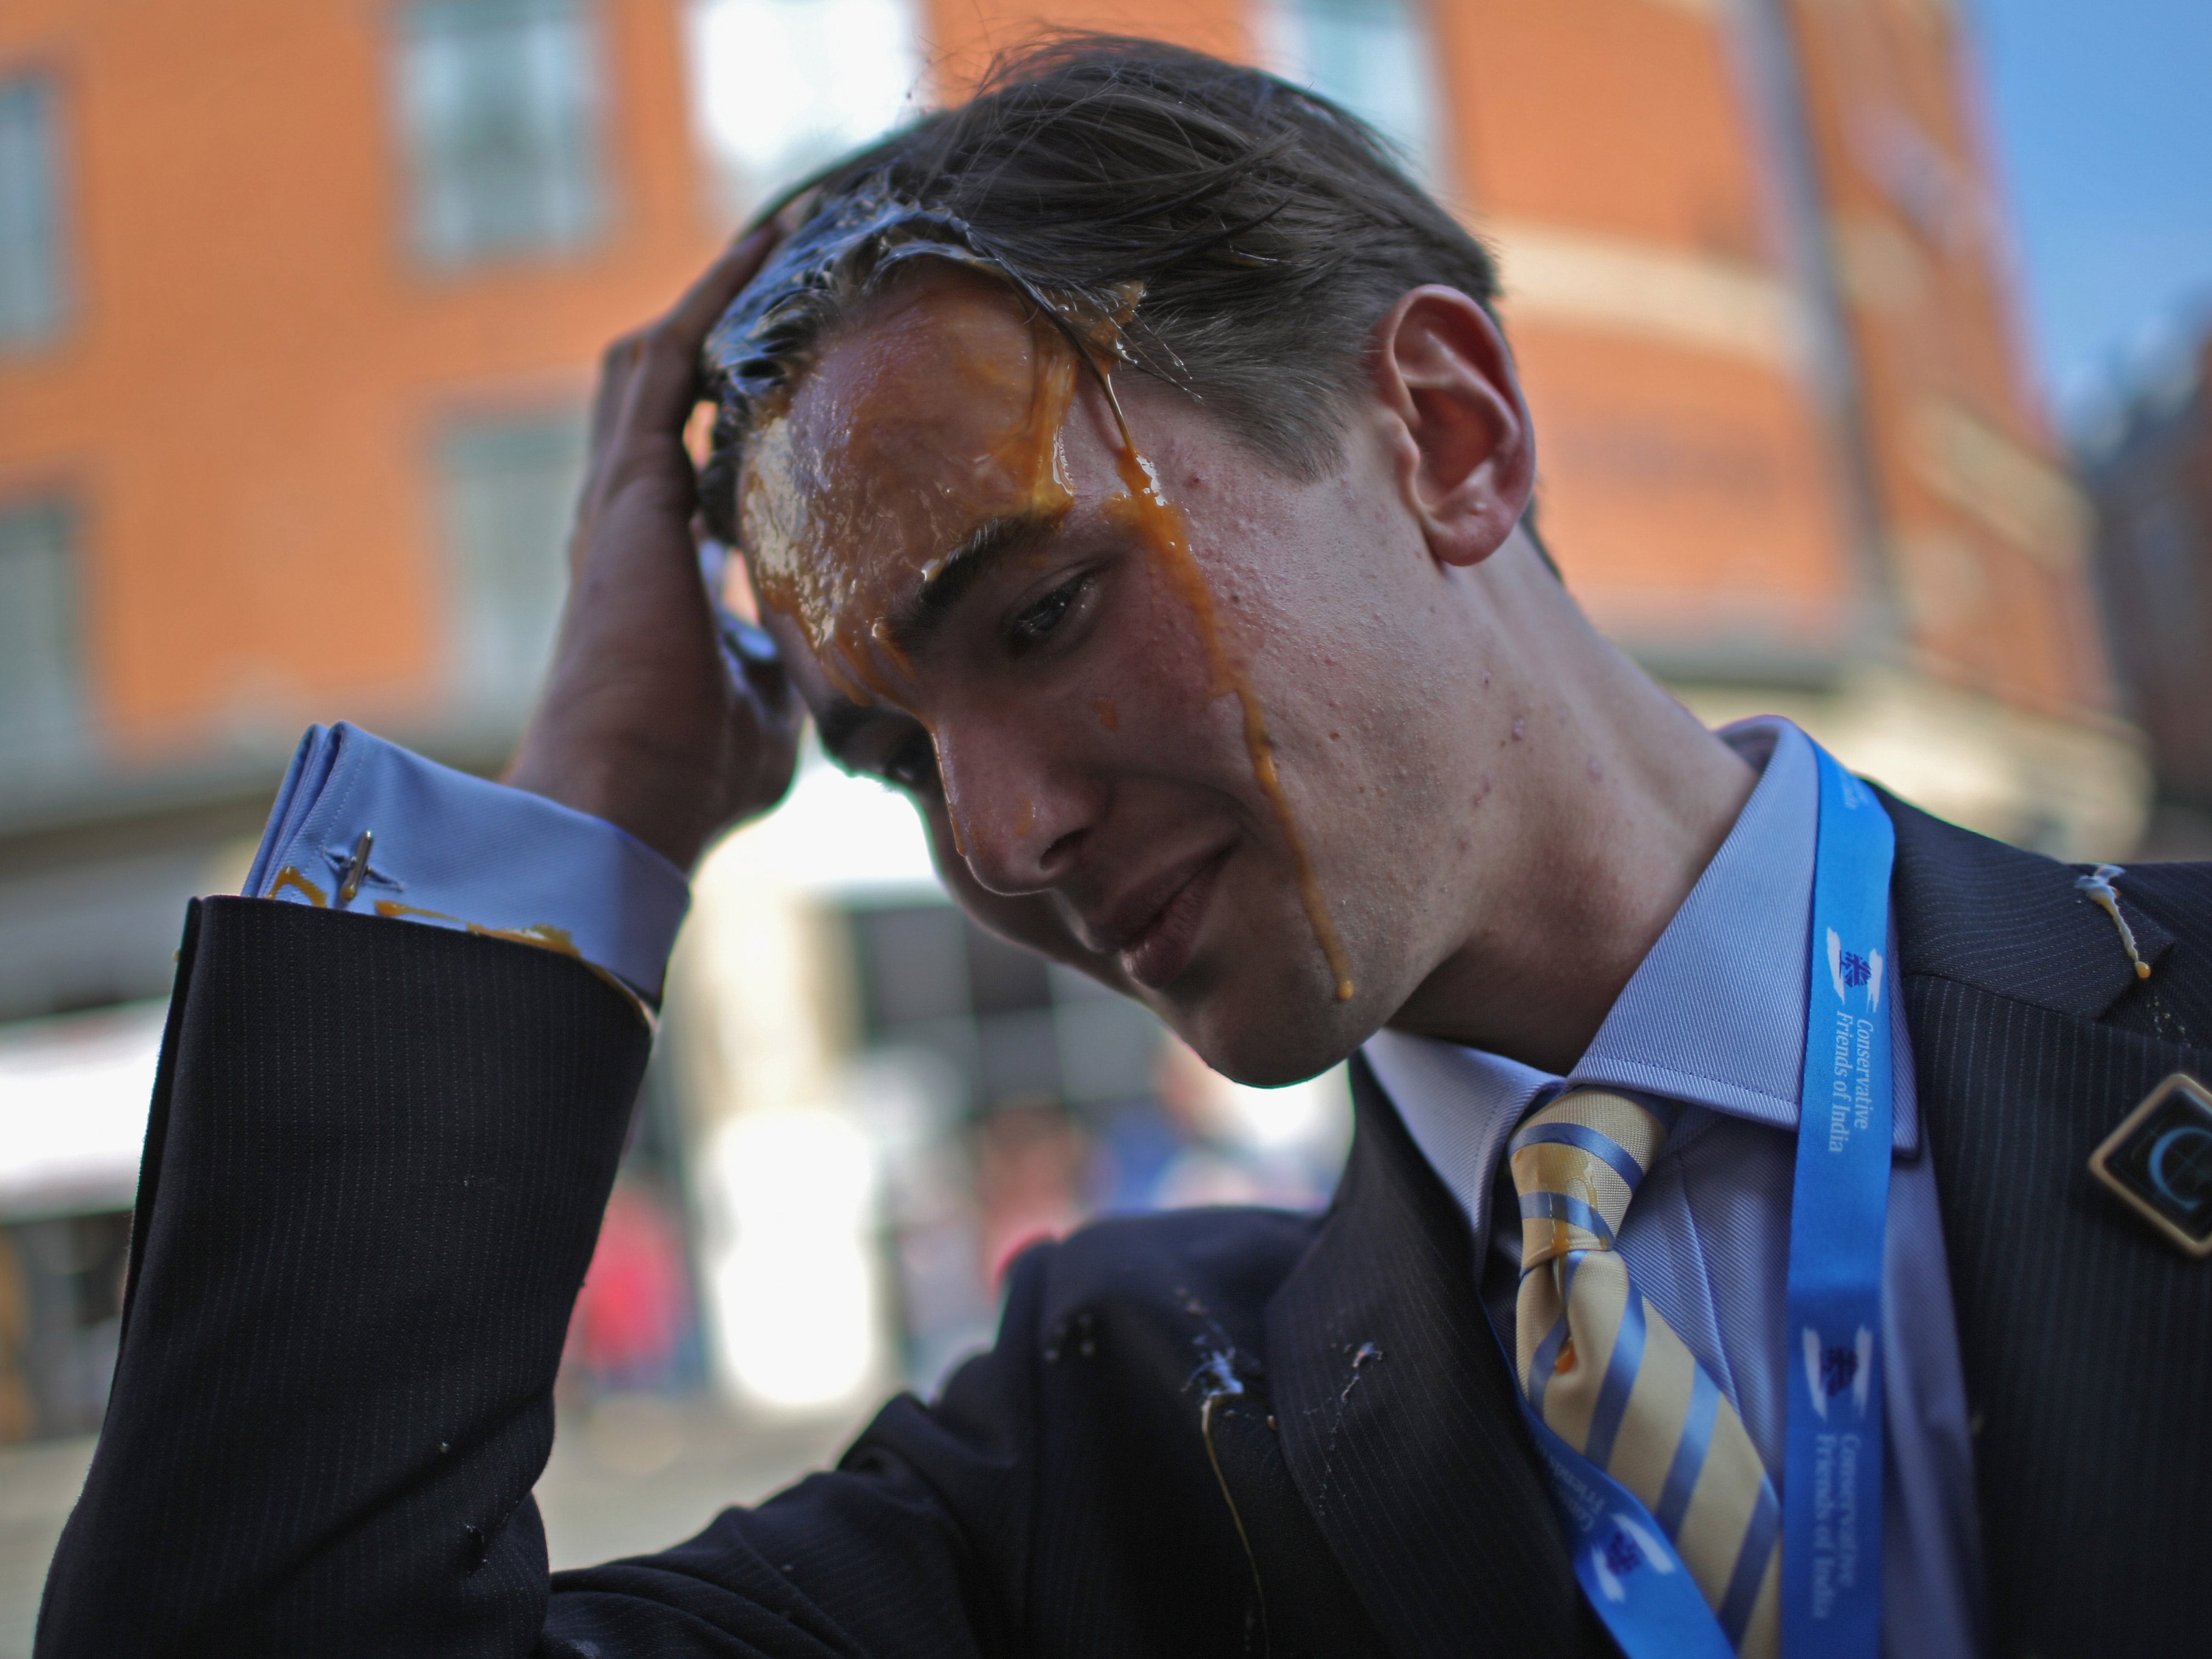 One smartly-dressed young conference-goer, was egged in the city centre